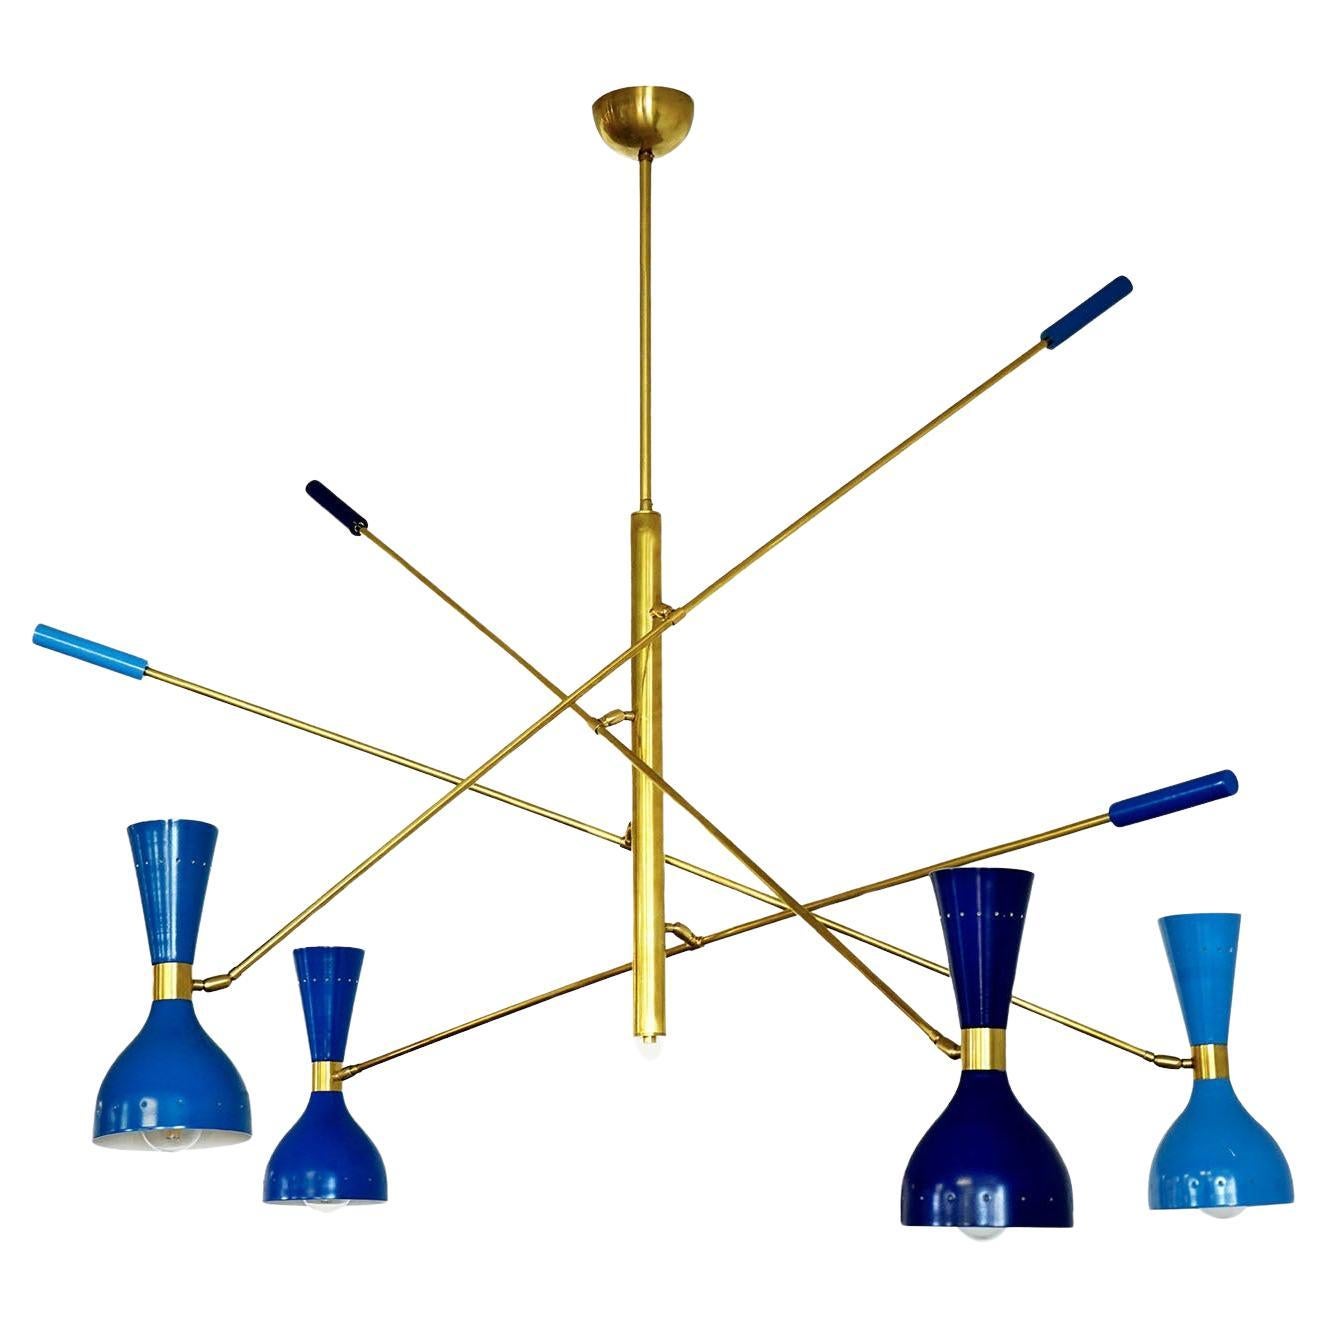 Contrappeso Chandelier, 4 hues of blue "Quadriennale" For Sale